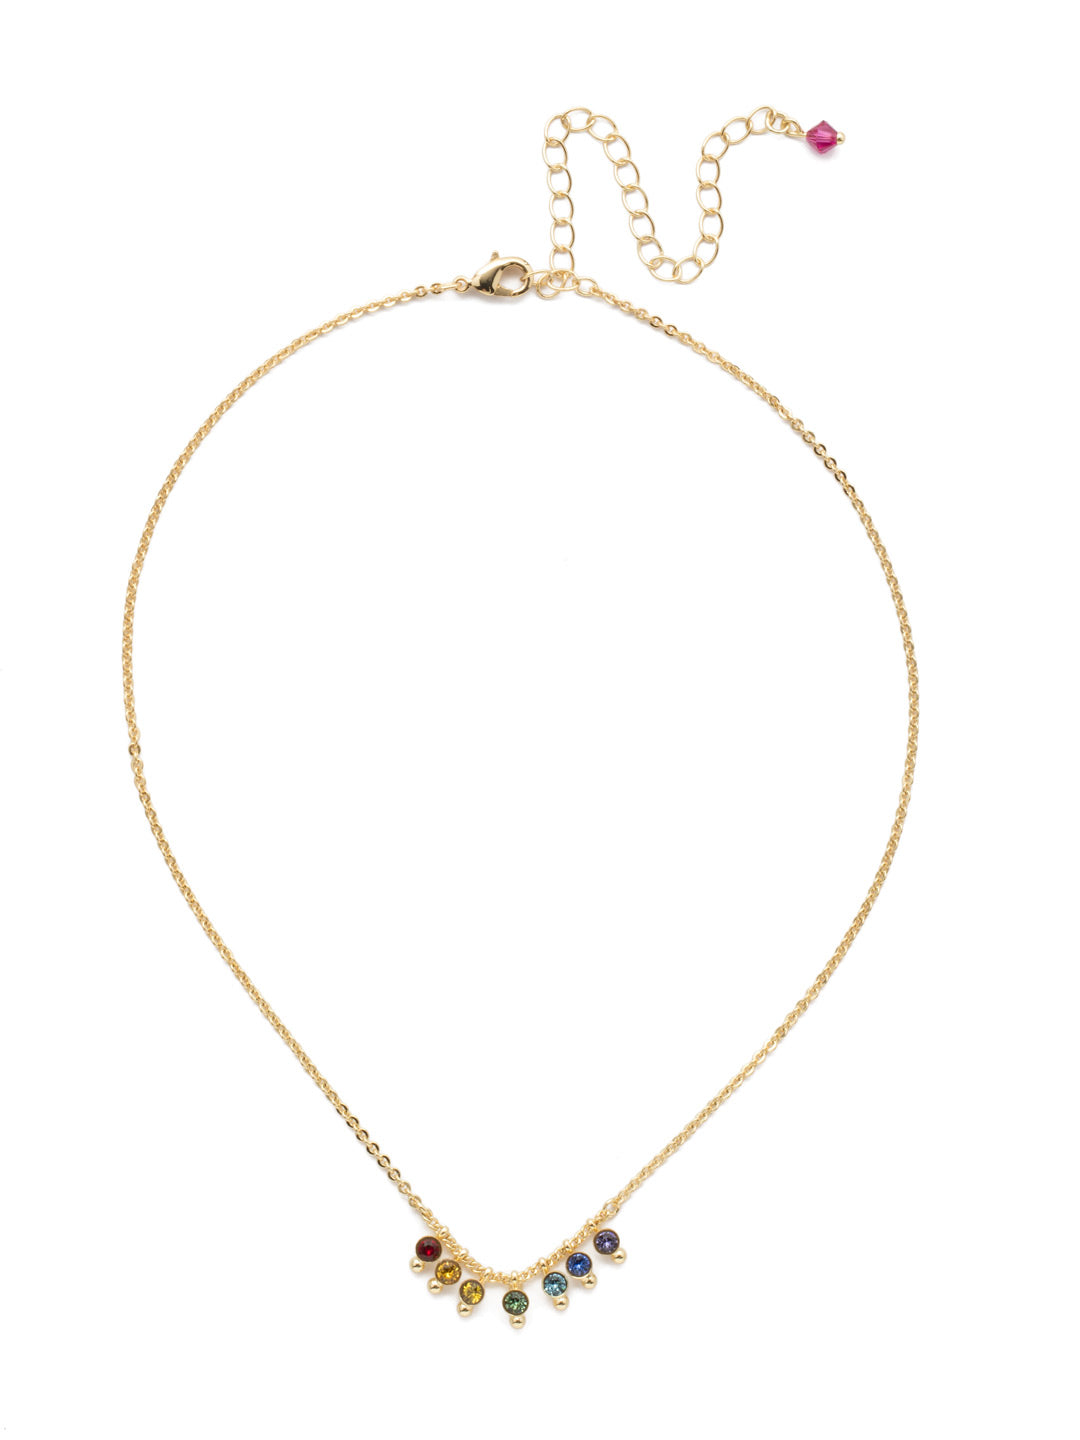 Delicate Dots Pendant Necklace - NDN115BGPRI - <p>Seven petite round cut crystals in ornamental metal settings adorn a thin chain in this simple, easy-to-layer necklace. From Sorrelli's Prism collection in our Bright Gold-tone finish.</p>